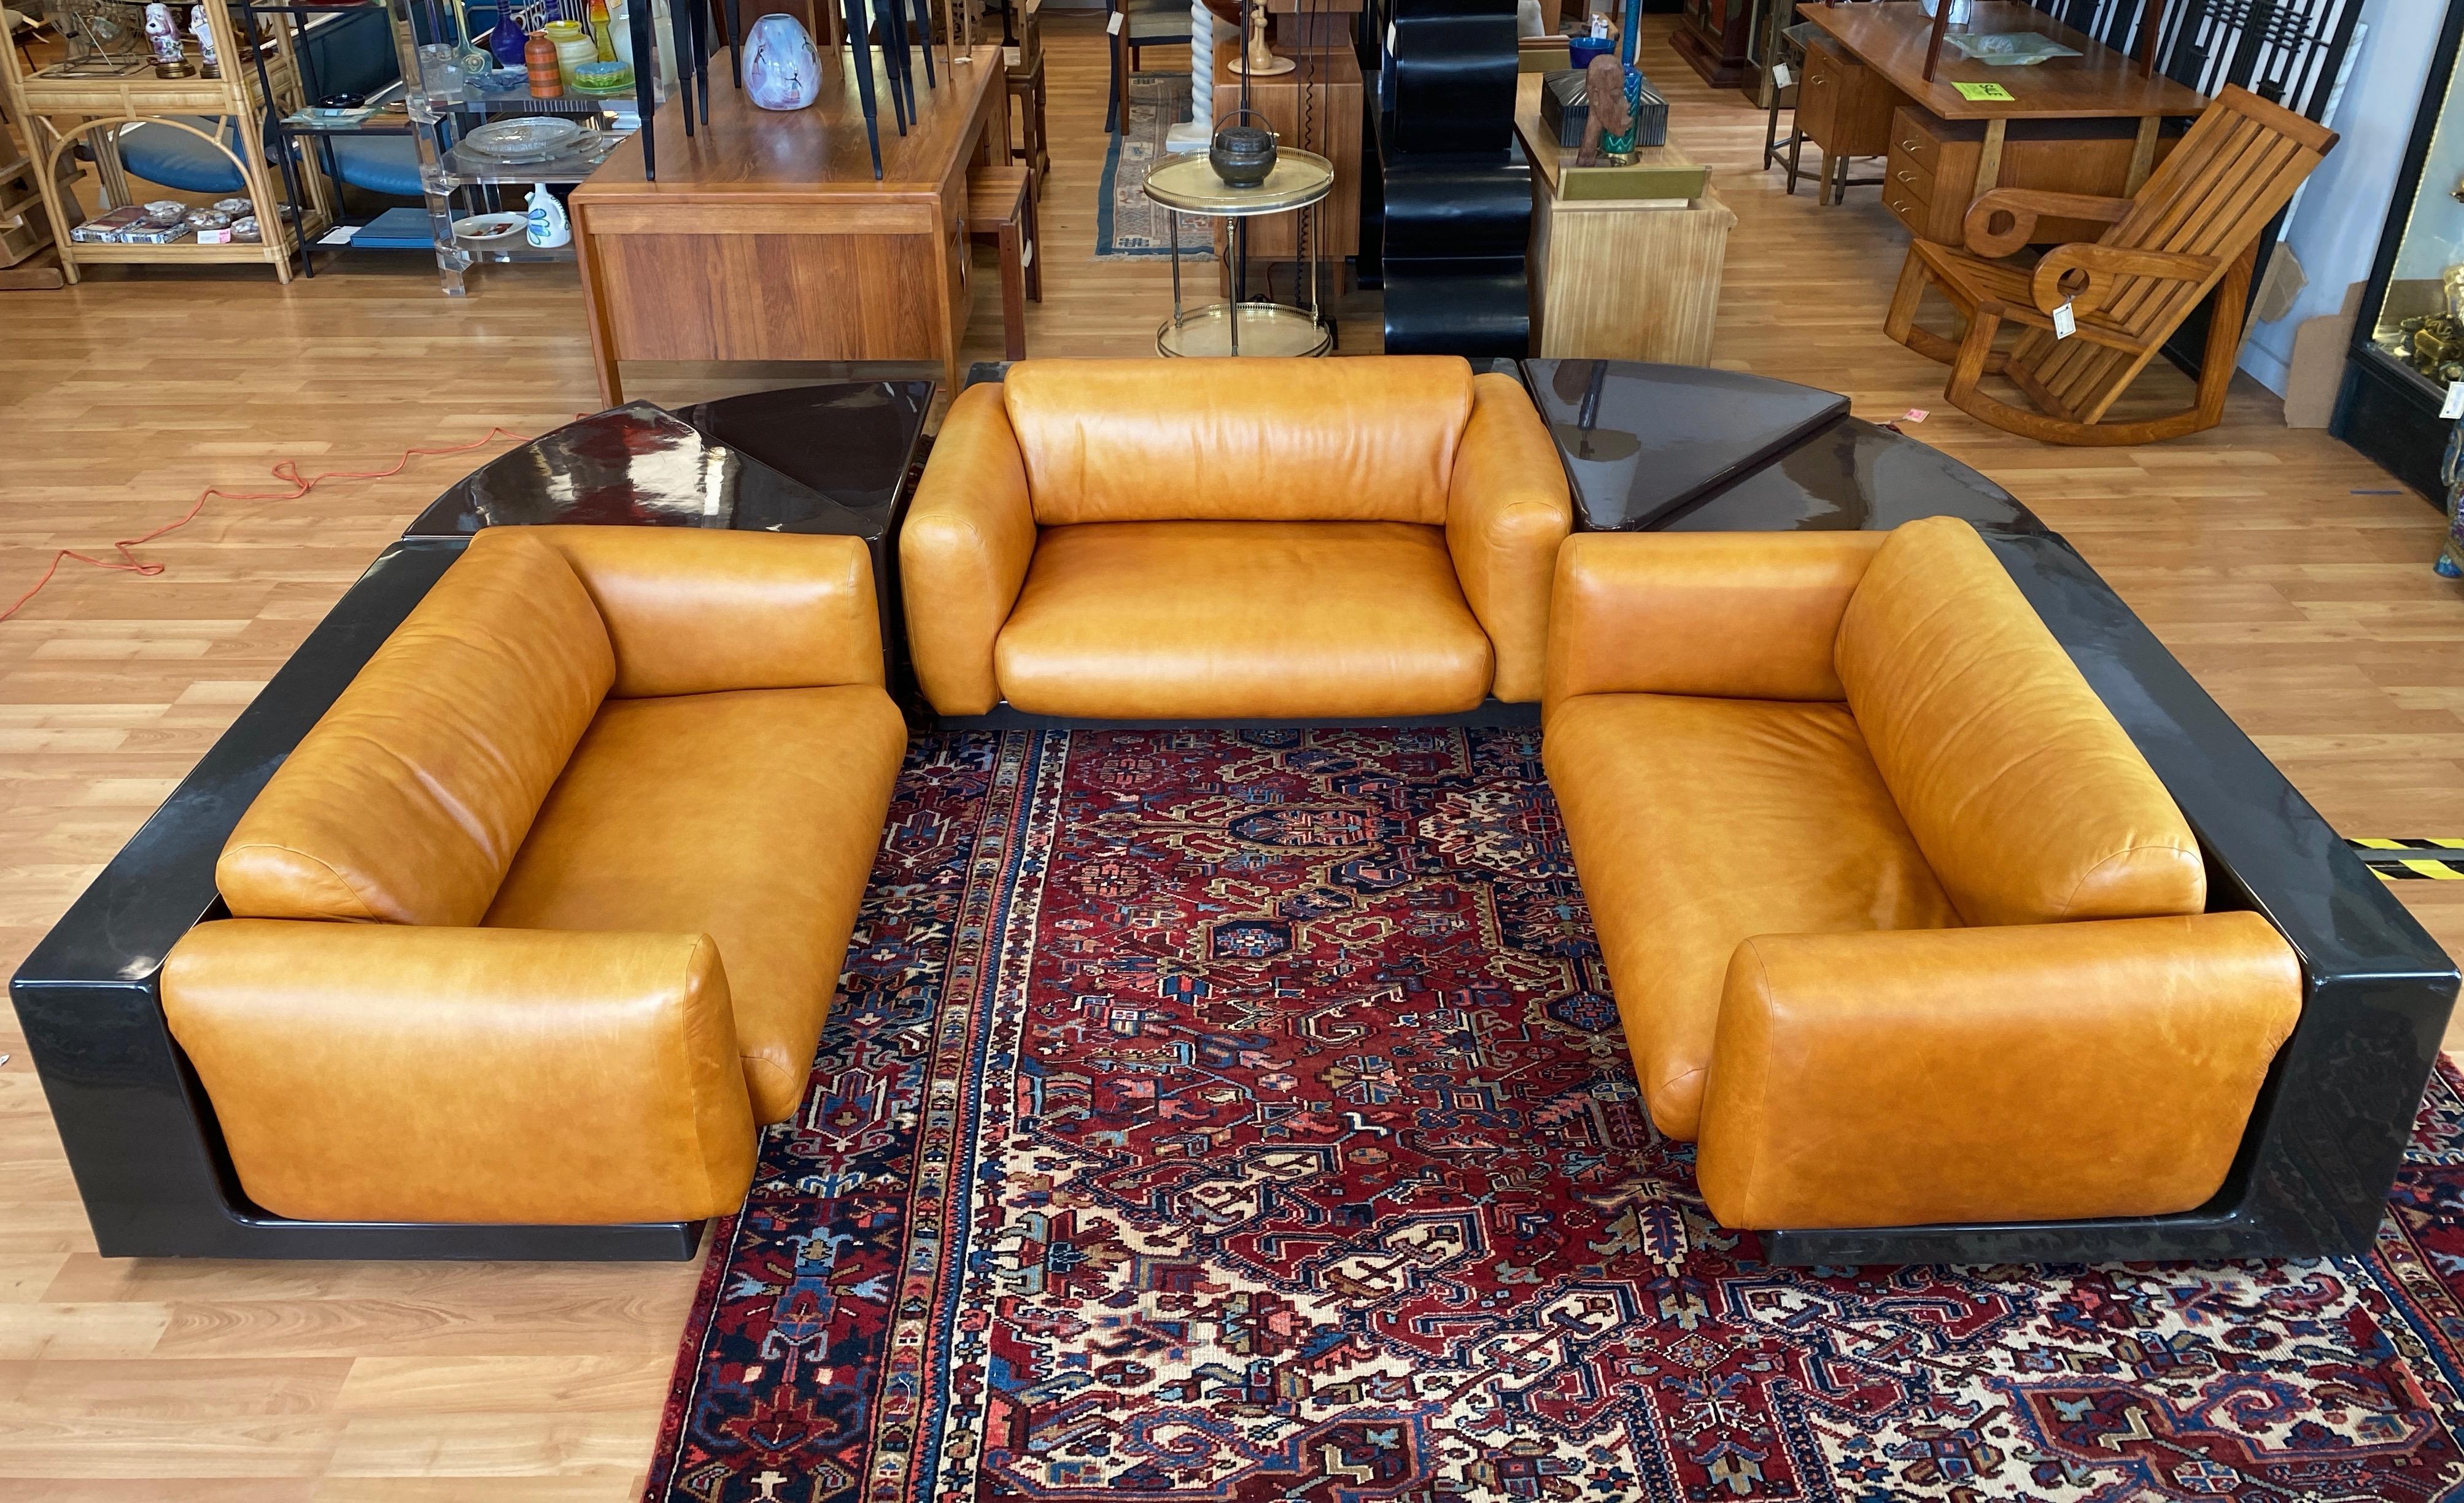 A very impressive and rare Gradual Lounge modular sofa & end table five-piece set by Cini Boeri for Gavina at Knoll.

The Gradual Lounge was the first piece created specifically for Knoll by Boeri, a designer and architect formerly of influential